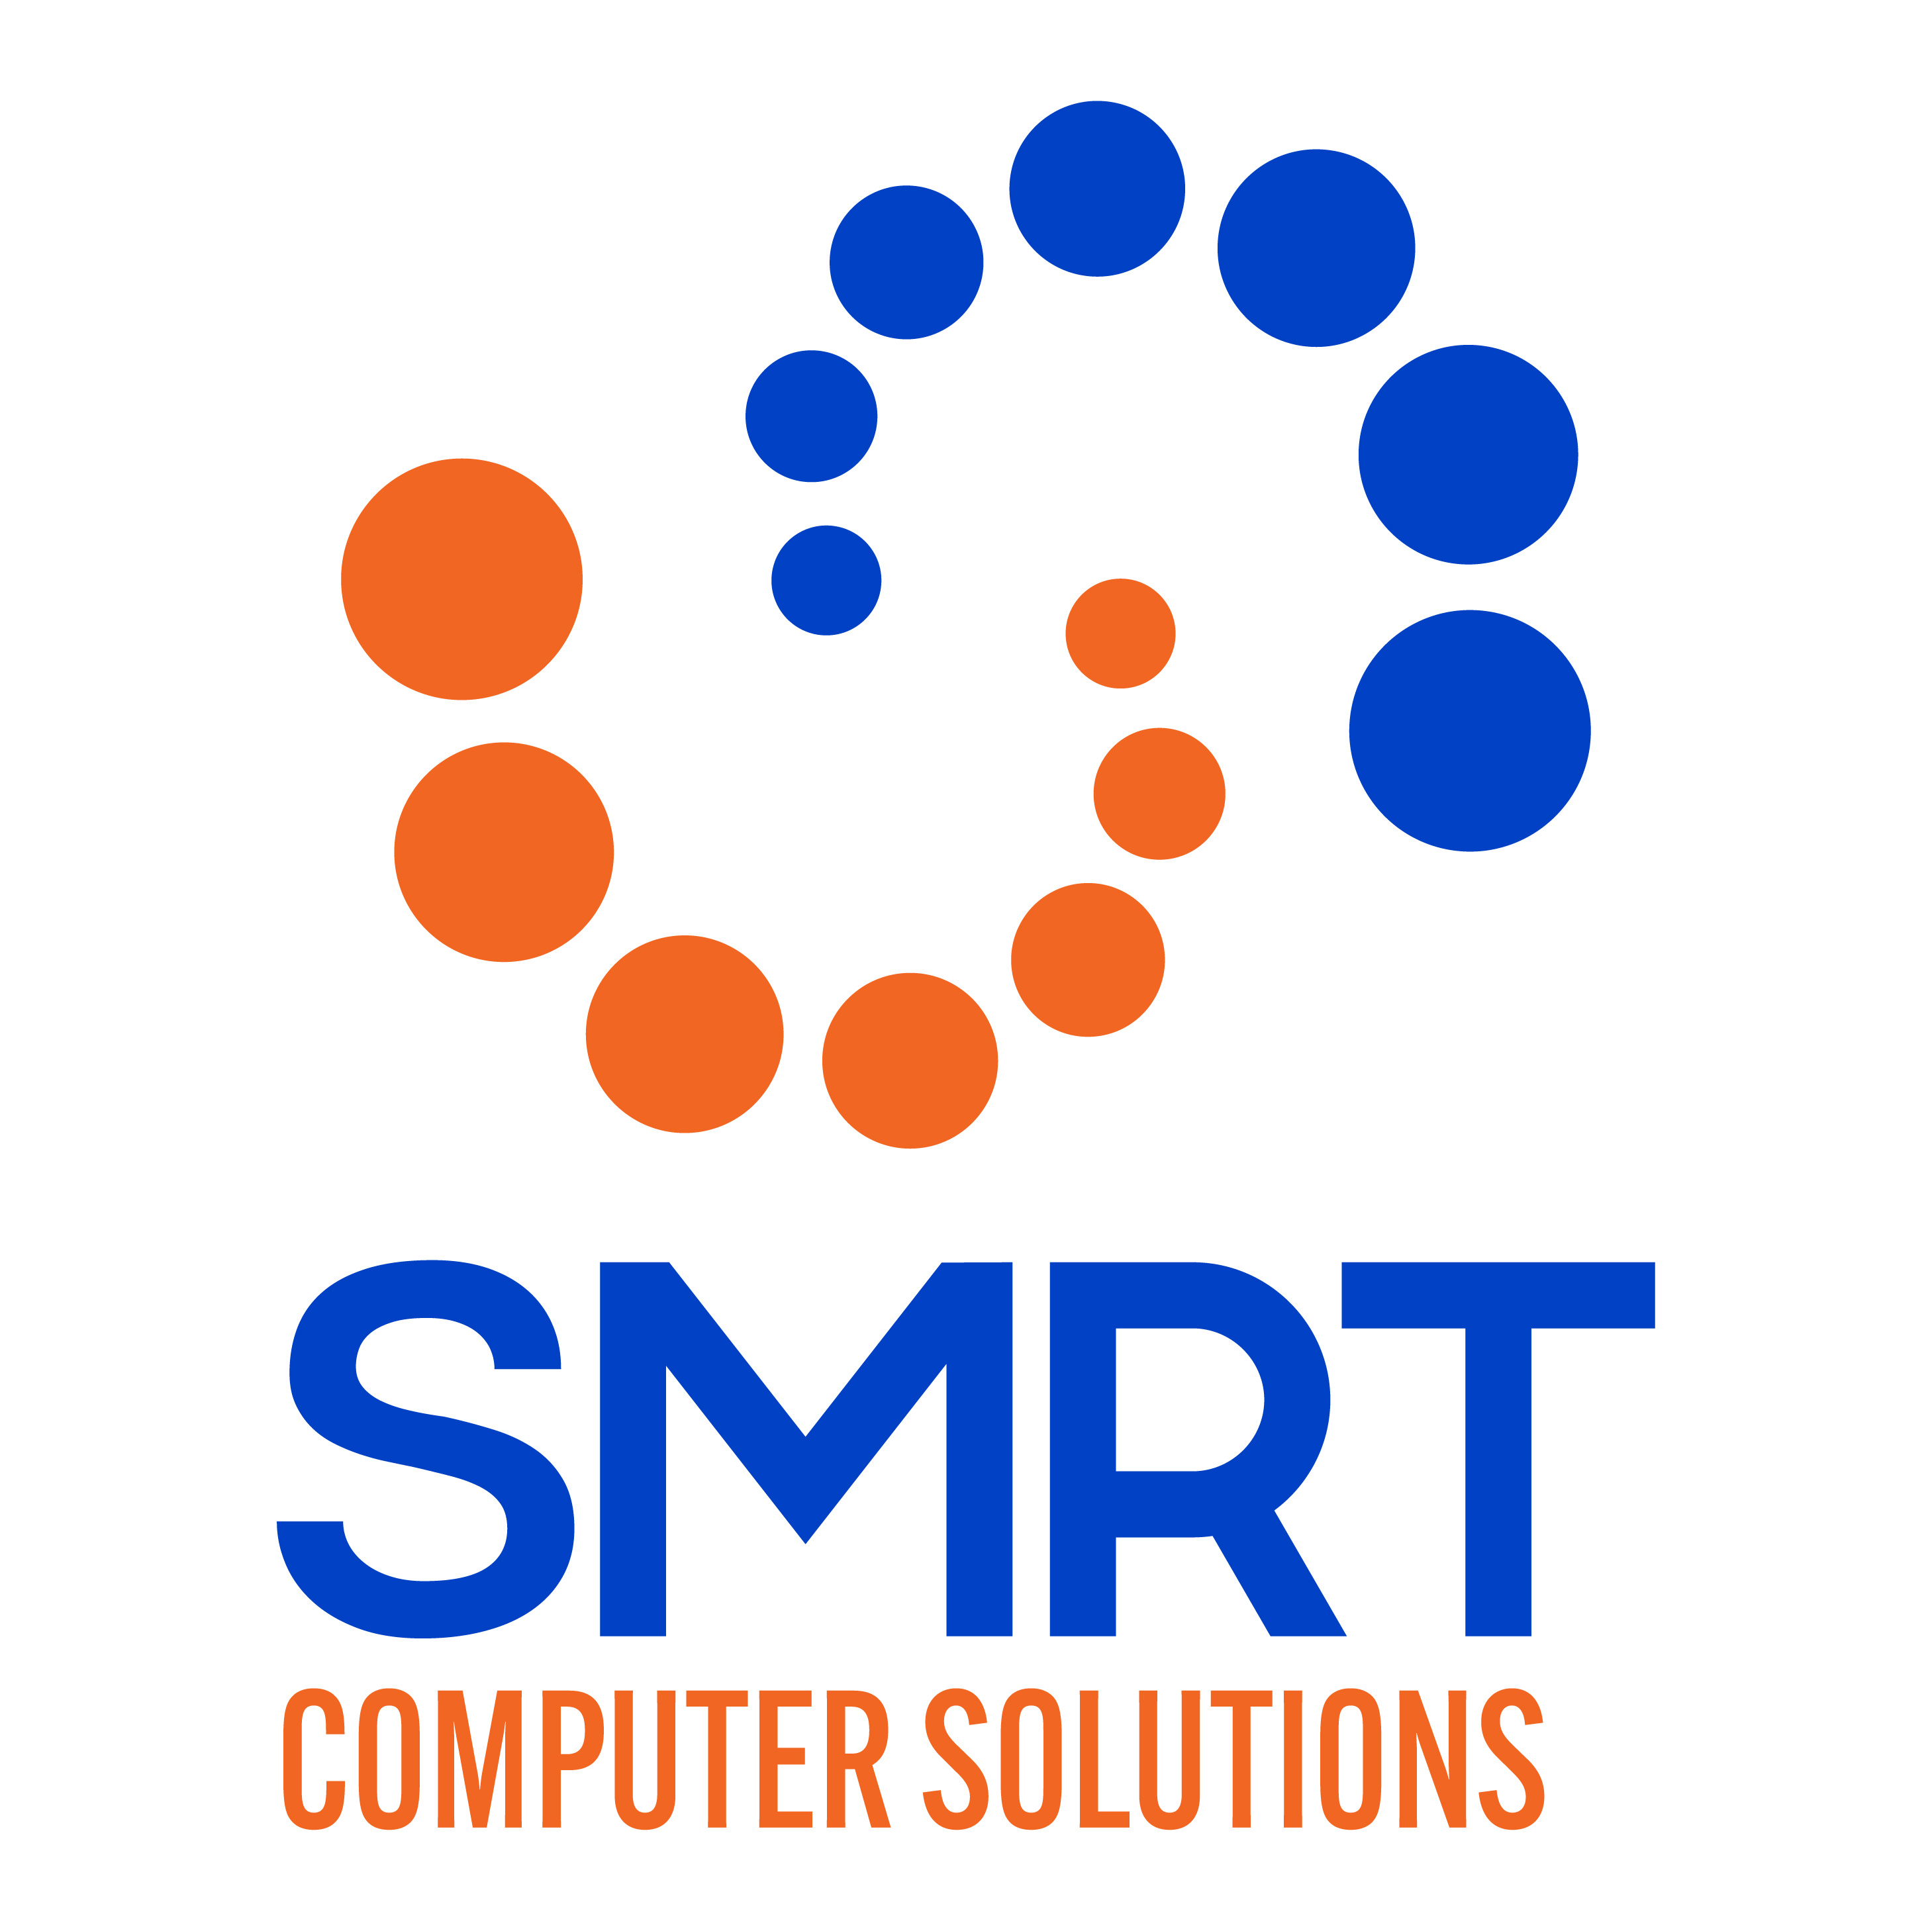 Image for SMRT Computer Solutions